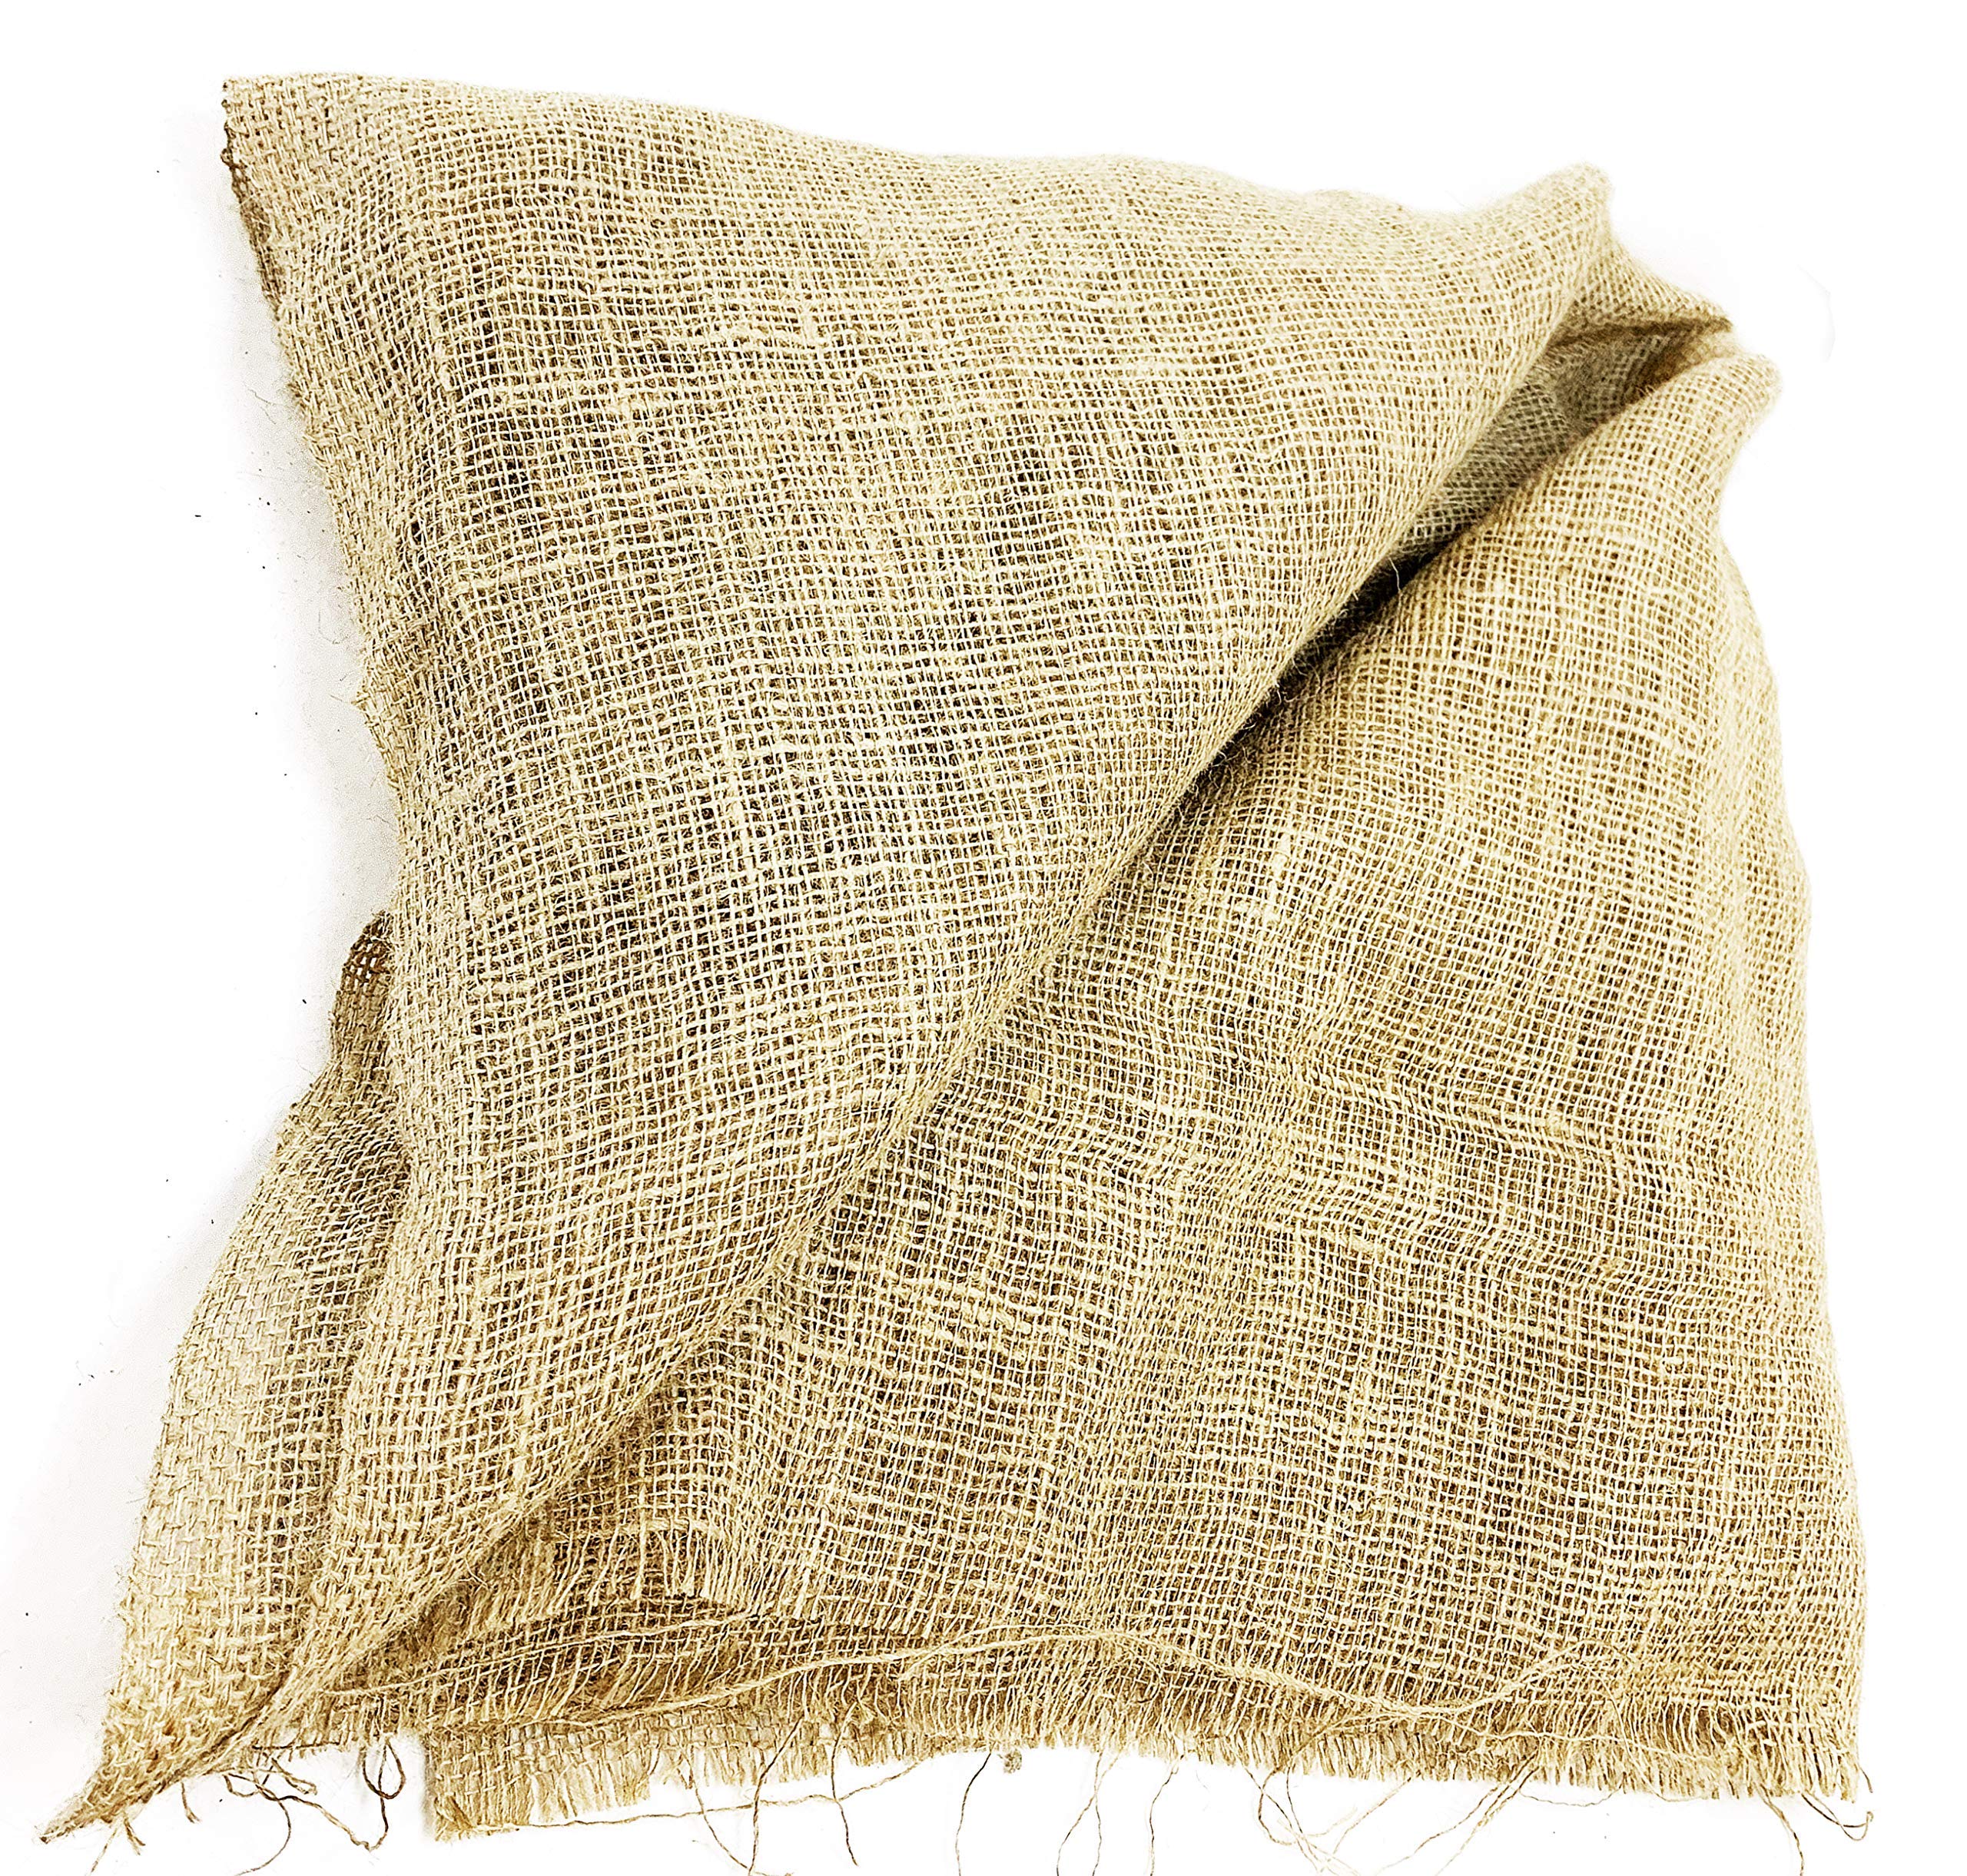 Burlap Wrap for Frost Protection, Keep Plant Warm and Moisturizing